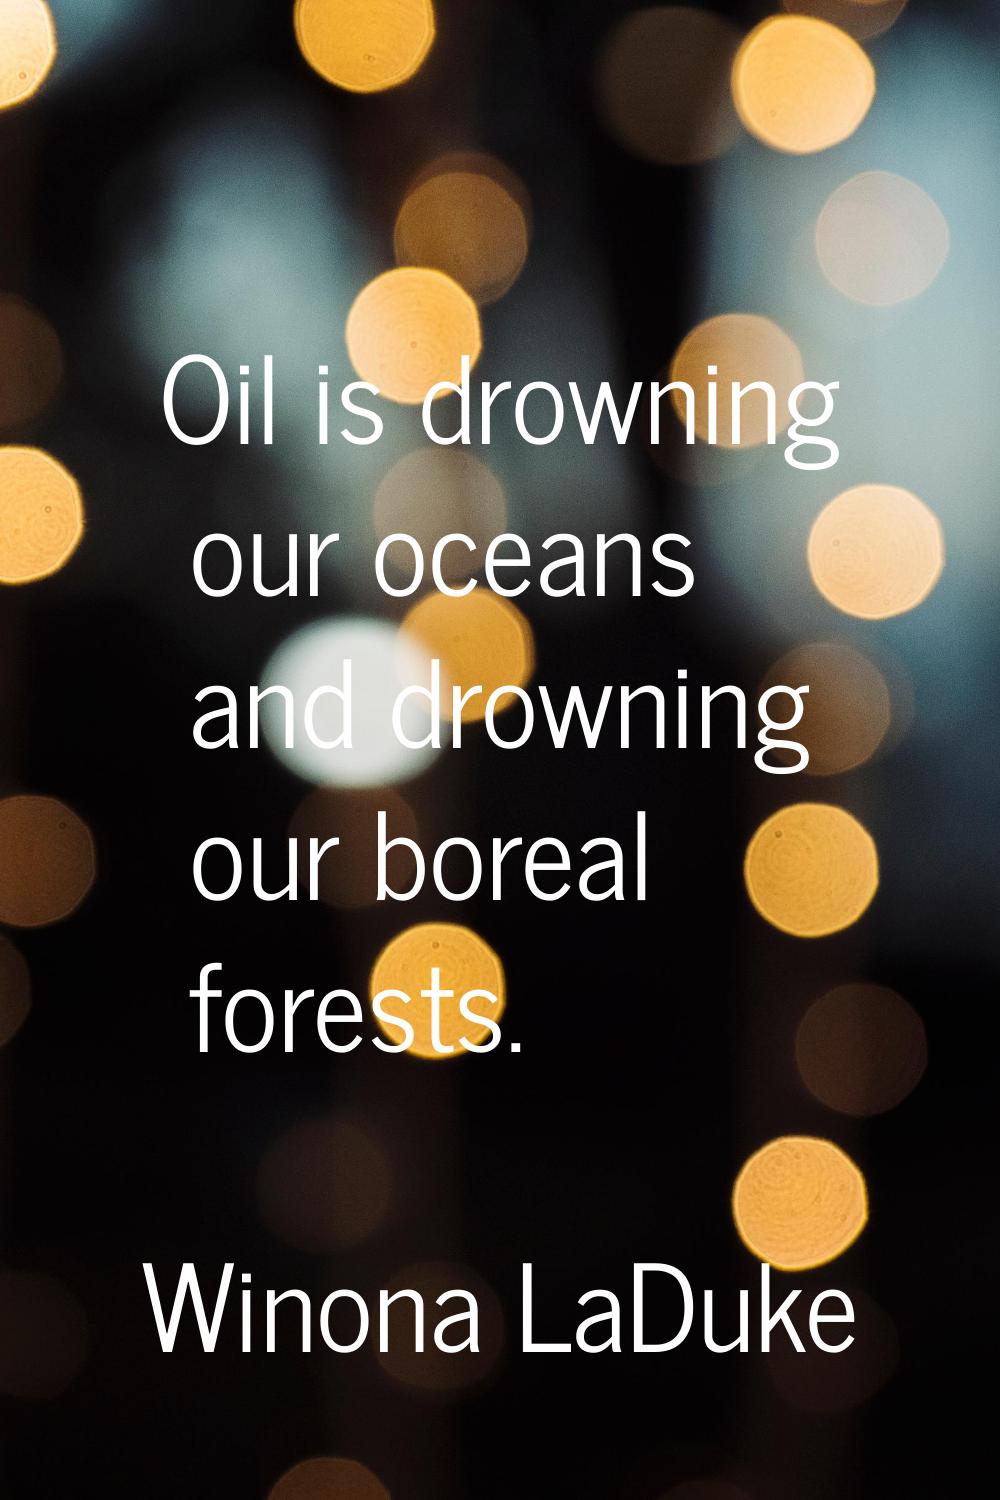 Oil is drowning our oceans and drowning our boreal forests.